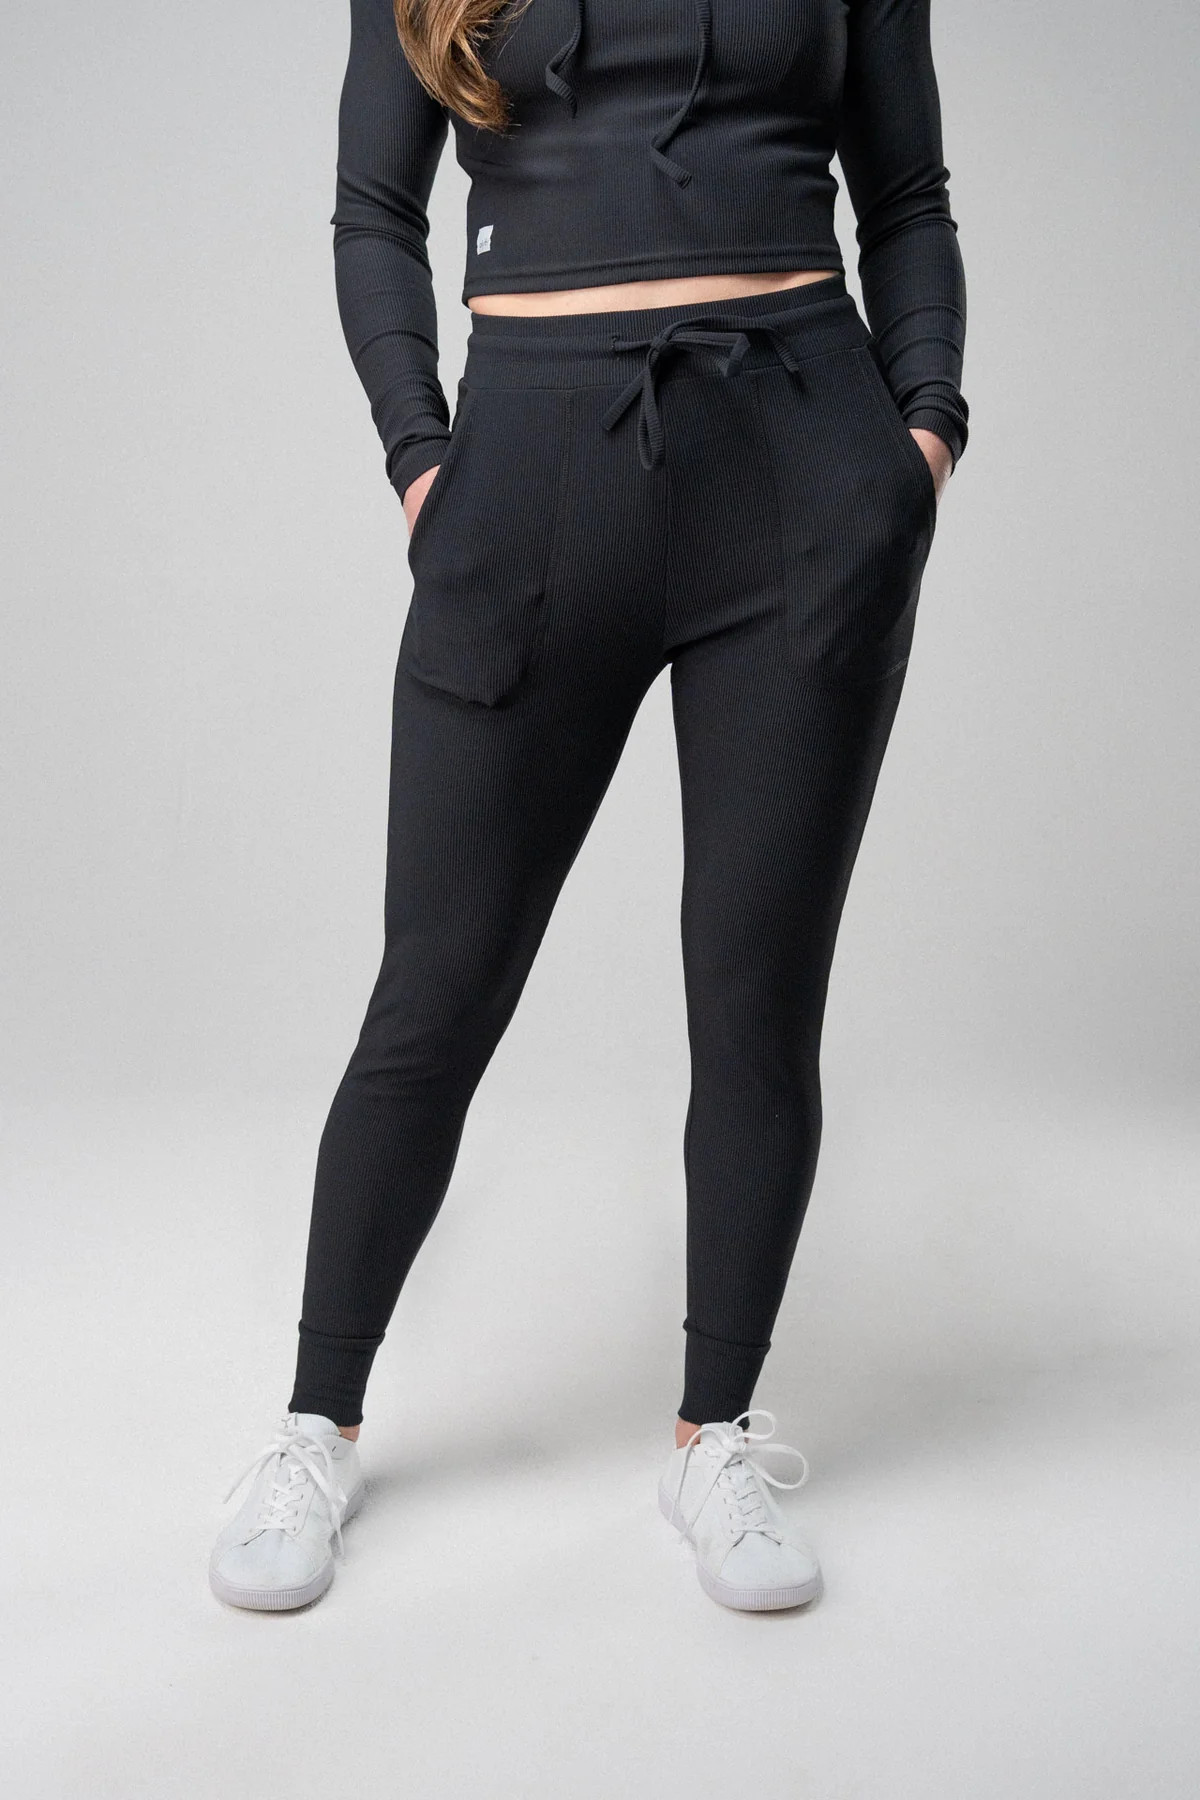 purposely dynamic joggers | Alyth Active